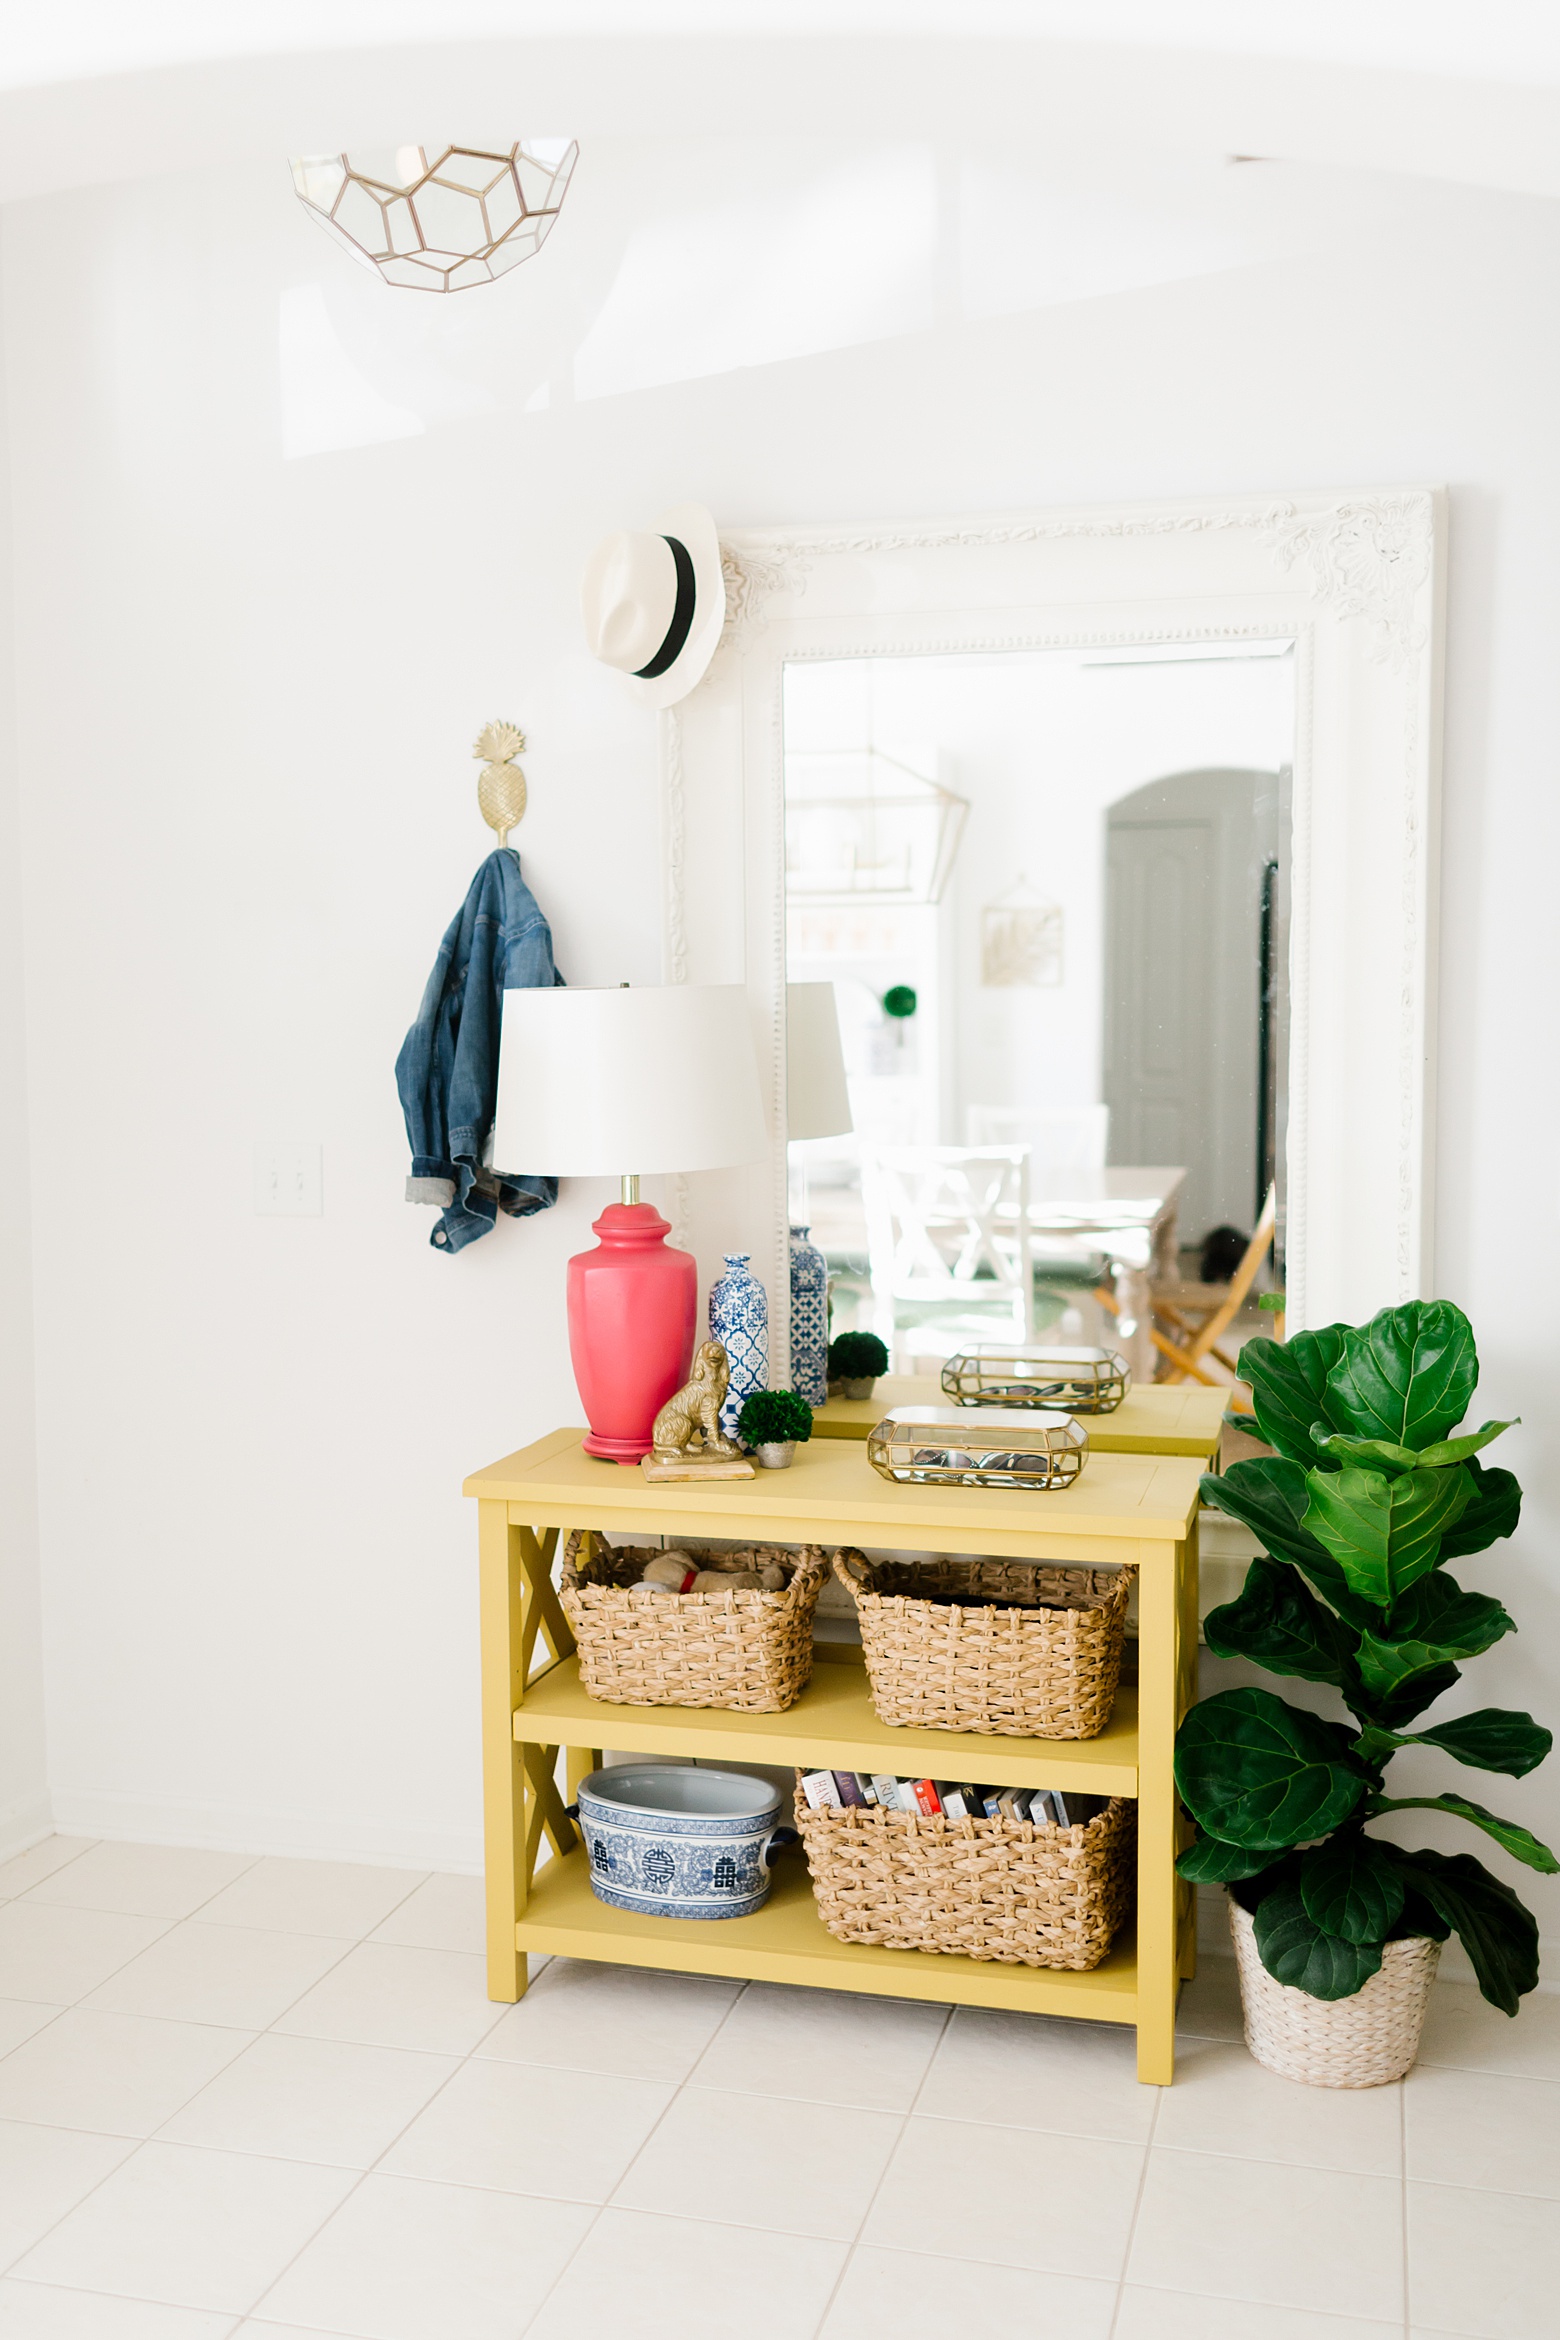 A bright, fresh and colorful entryway, yellow shelf, fiddle leaf fig, all white walls, brass light fixture, bright and colorful home